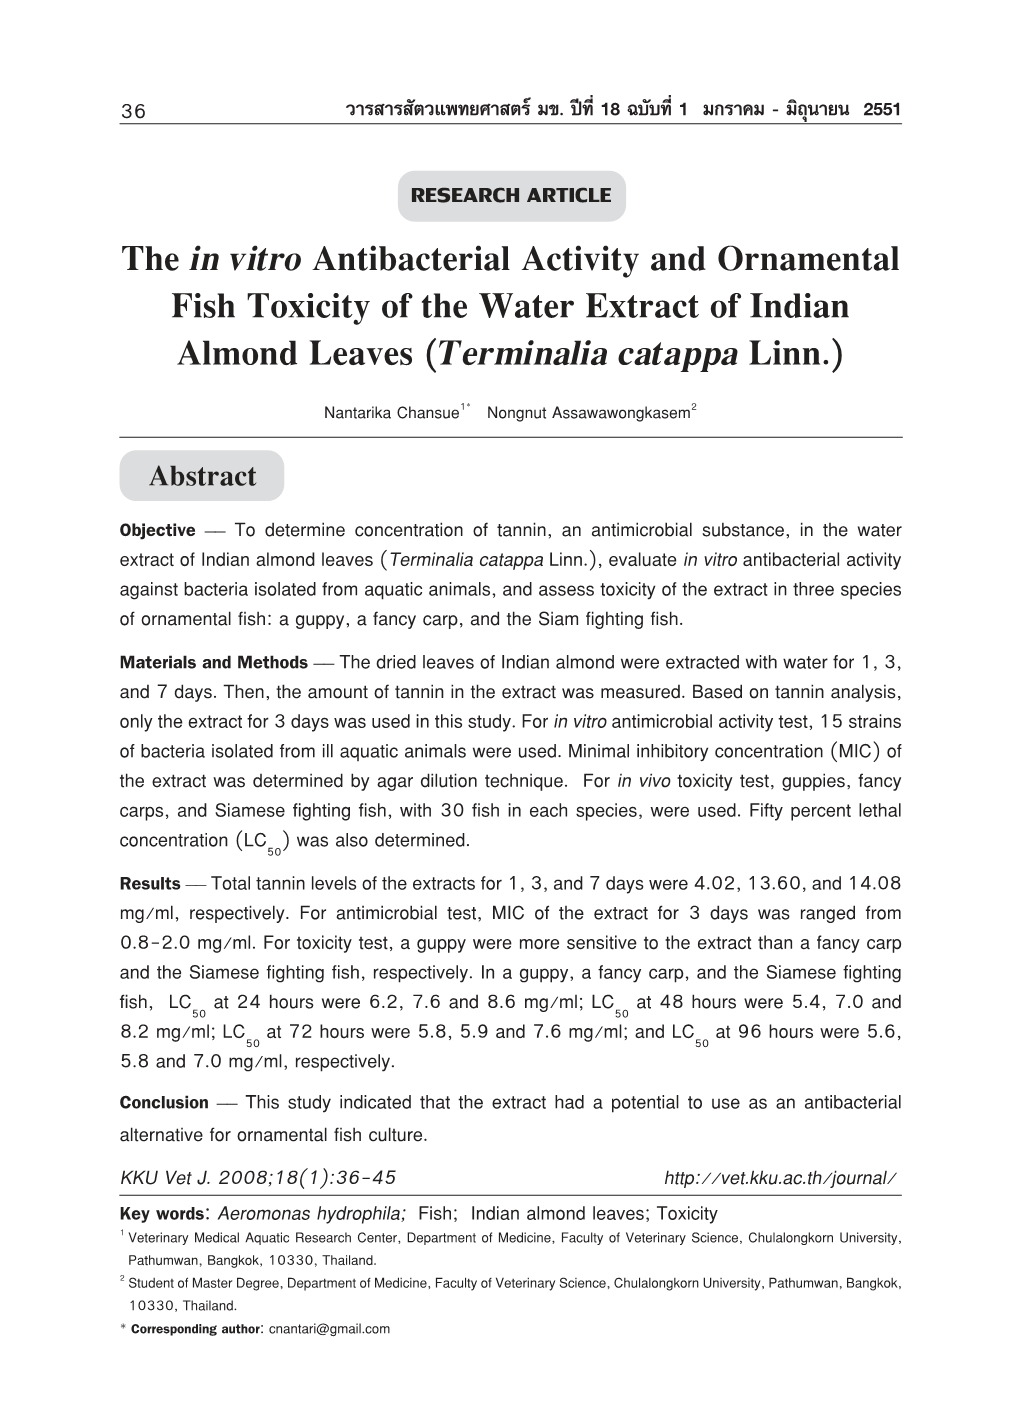 The in Vitro Antibacterial Activity and Ornamental Fish Toxicity of the Water Extract of Indian Almond Leaves (Terminalia Catappa Linn.)